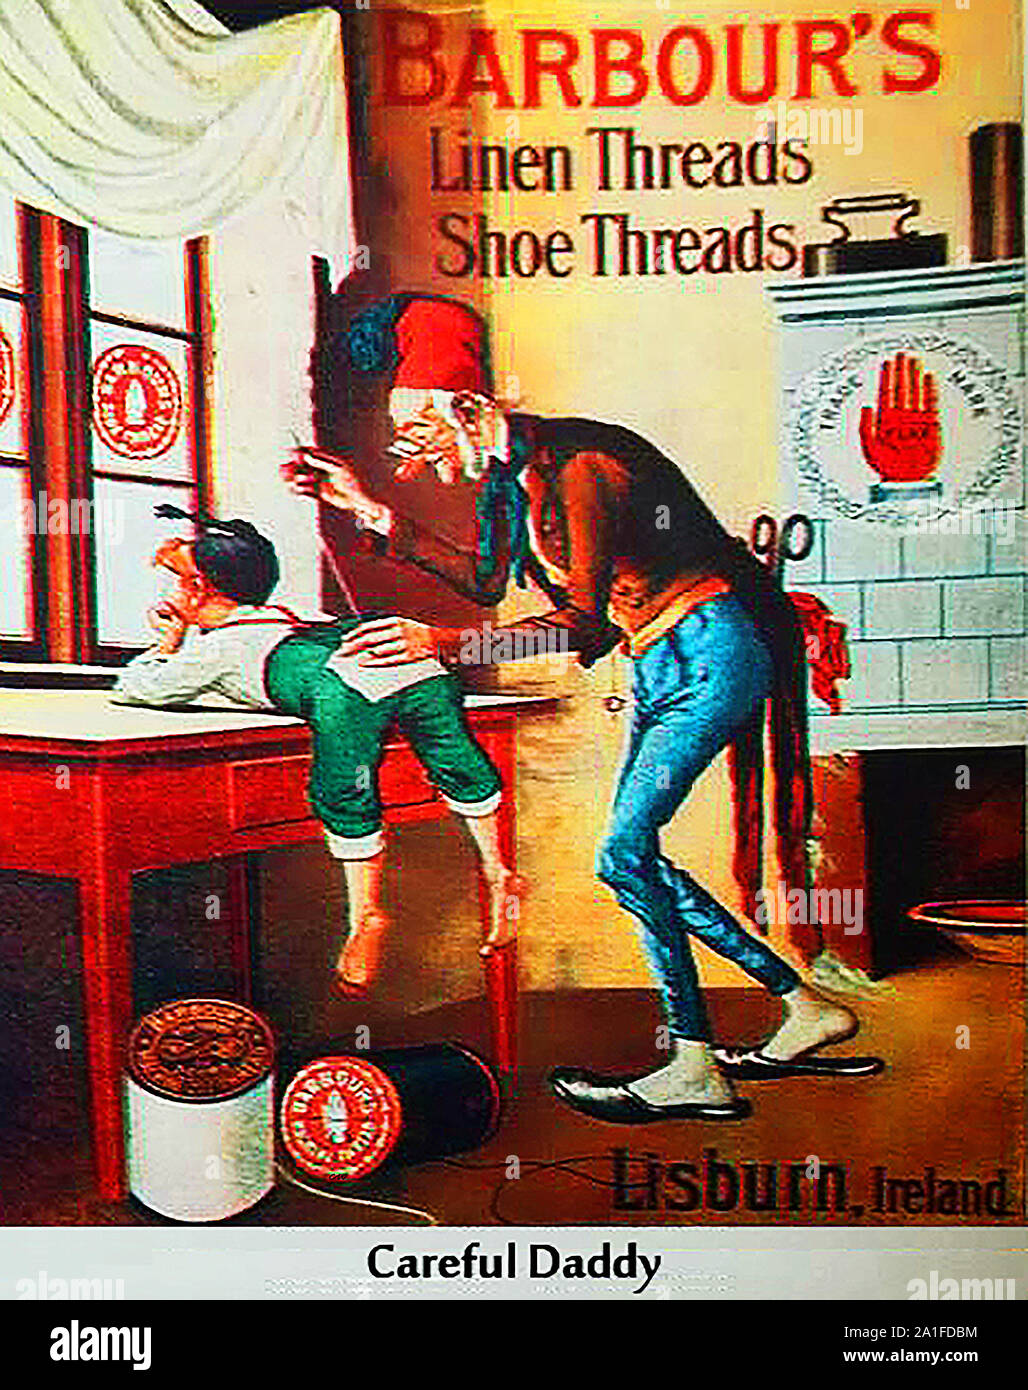 An early advertisement  (c1898 )for Barbour's linen threads and shoe threads showing a cartoon version of a man mending his son's trousers and giant reels of cotton. Barbour's of Lisburn was originally started by  John Barbour  (A Scotsman from  Paisley) in 1785, who bought linen thread for manufacturing in Scotland. In 1999 it was acquired by Coats Viyella. Barbour's trademark was the Red Hand of Ulster Stock Photo